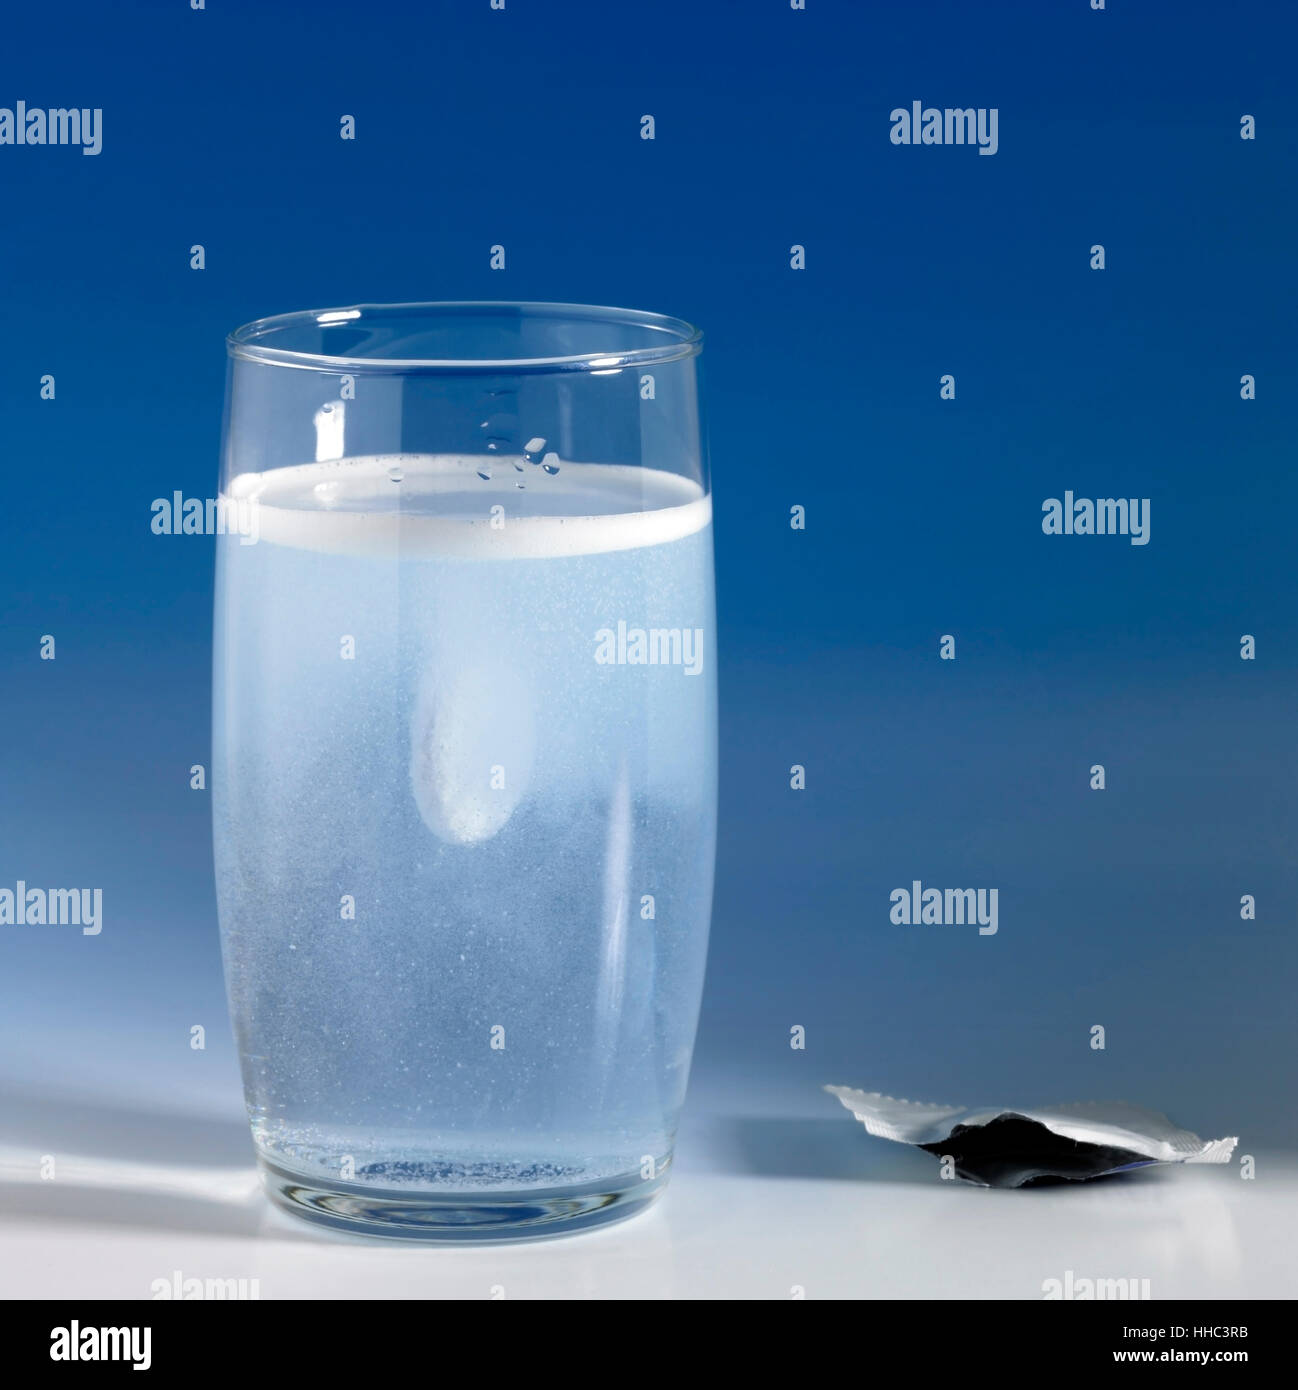 glass, chalice, tumbler, drink, pain, means, agent, medicine, drug, remedy, Stock Photo